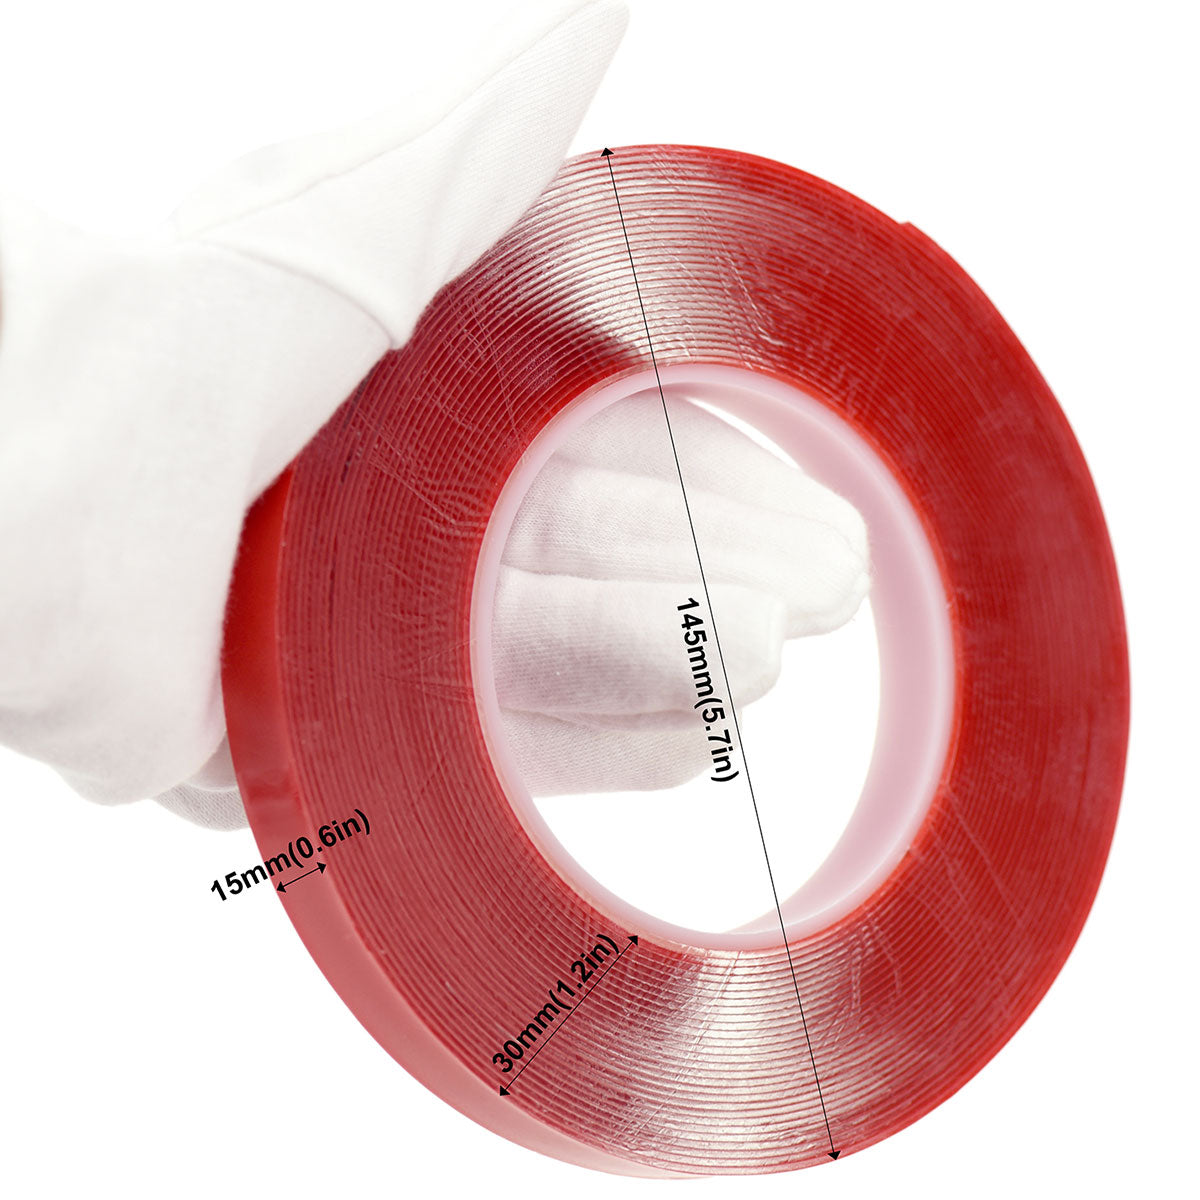 15mm x 1mm x 10 meters Multi-Purpose High Strength Transparent Acrylic Gel Adhesive Double Sided Tape Roll No Residue